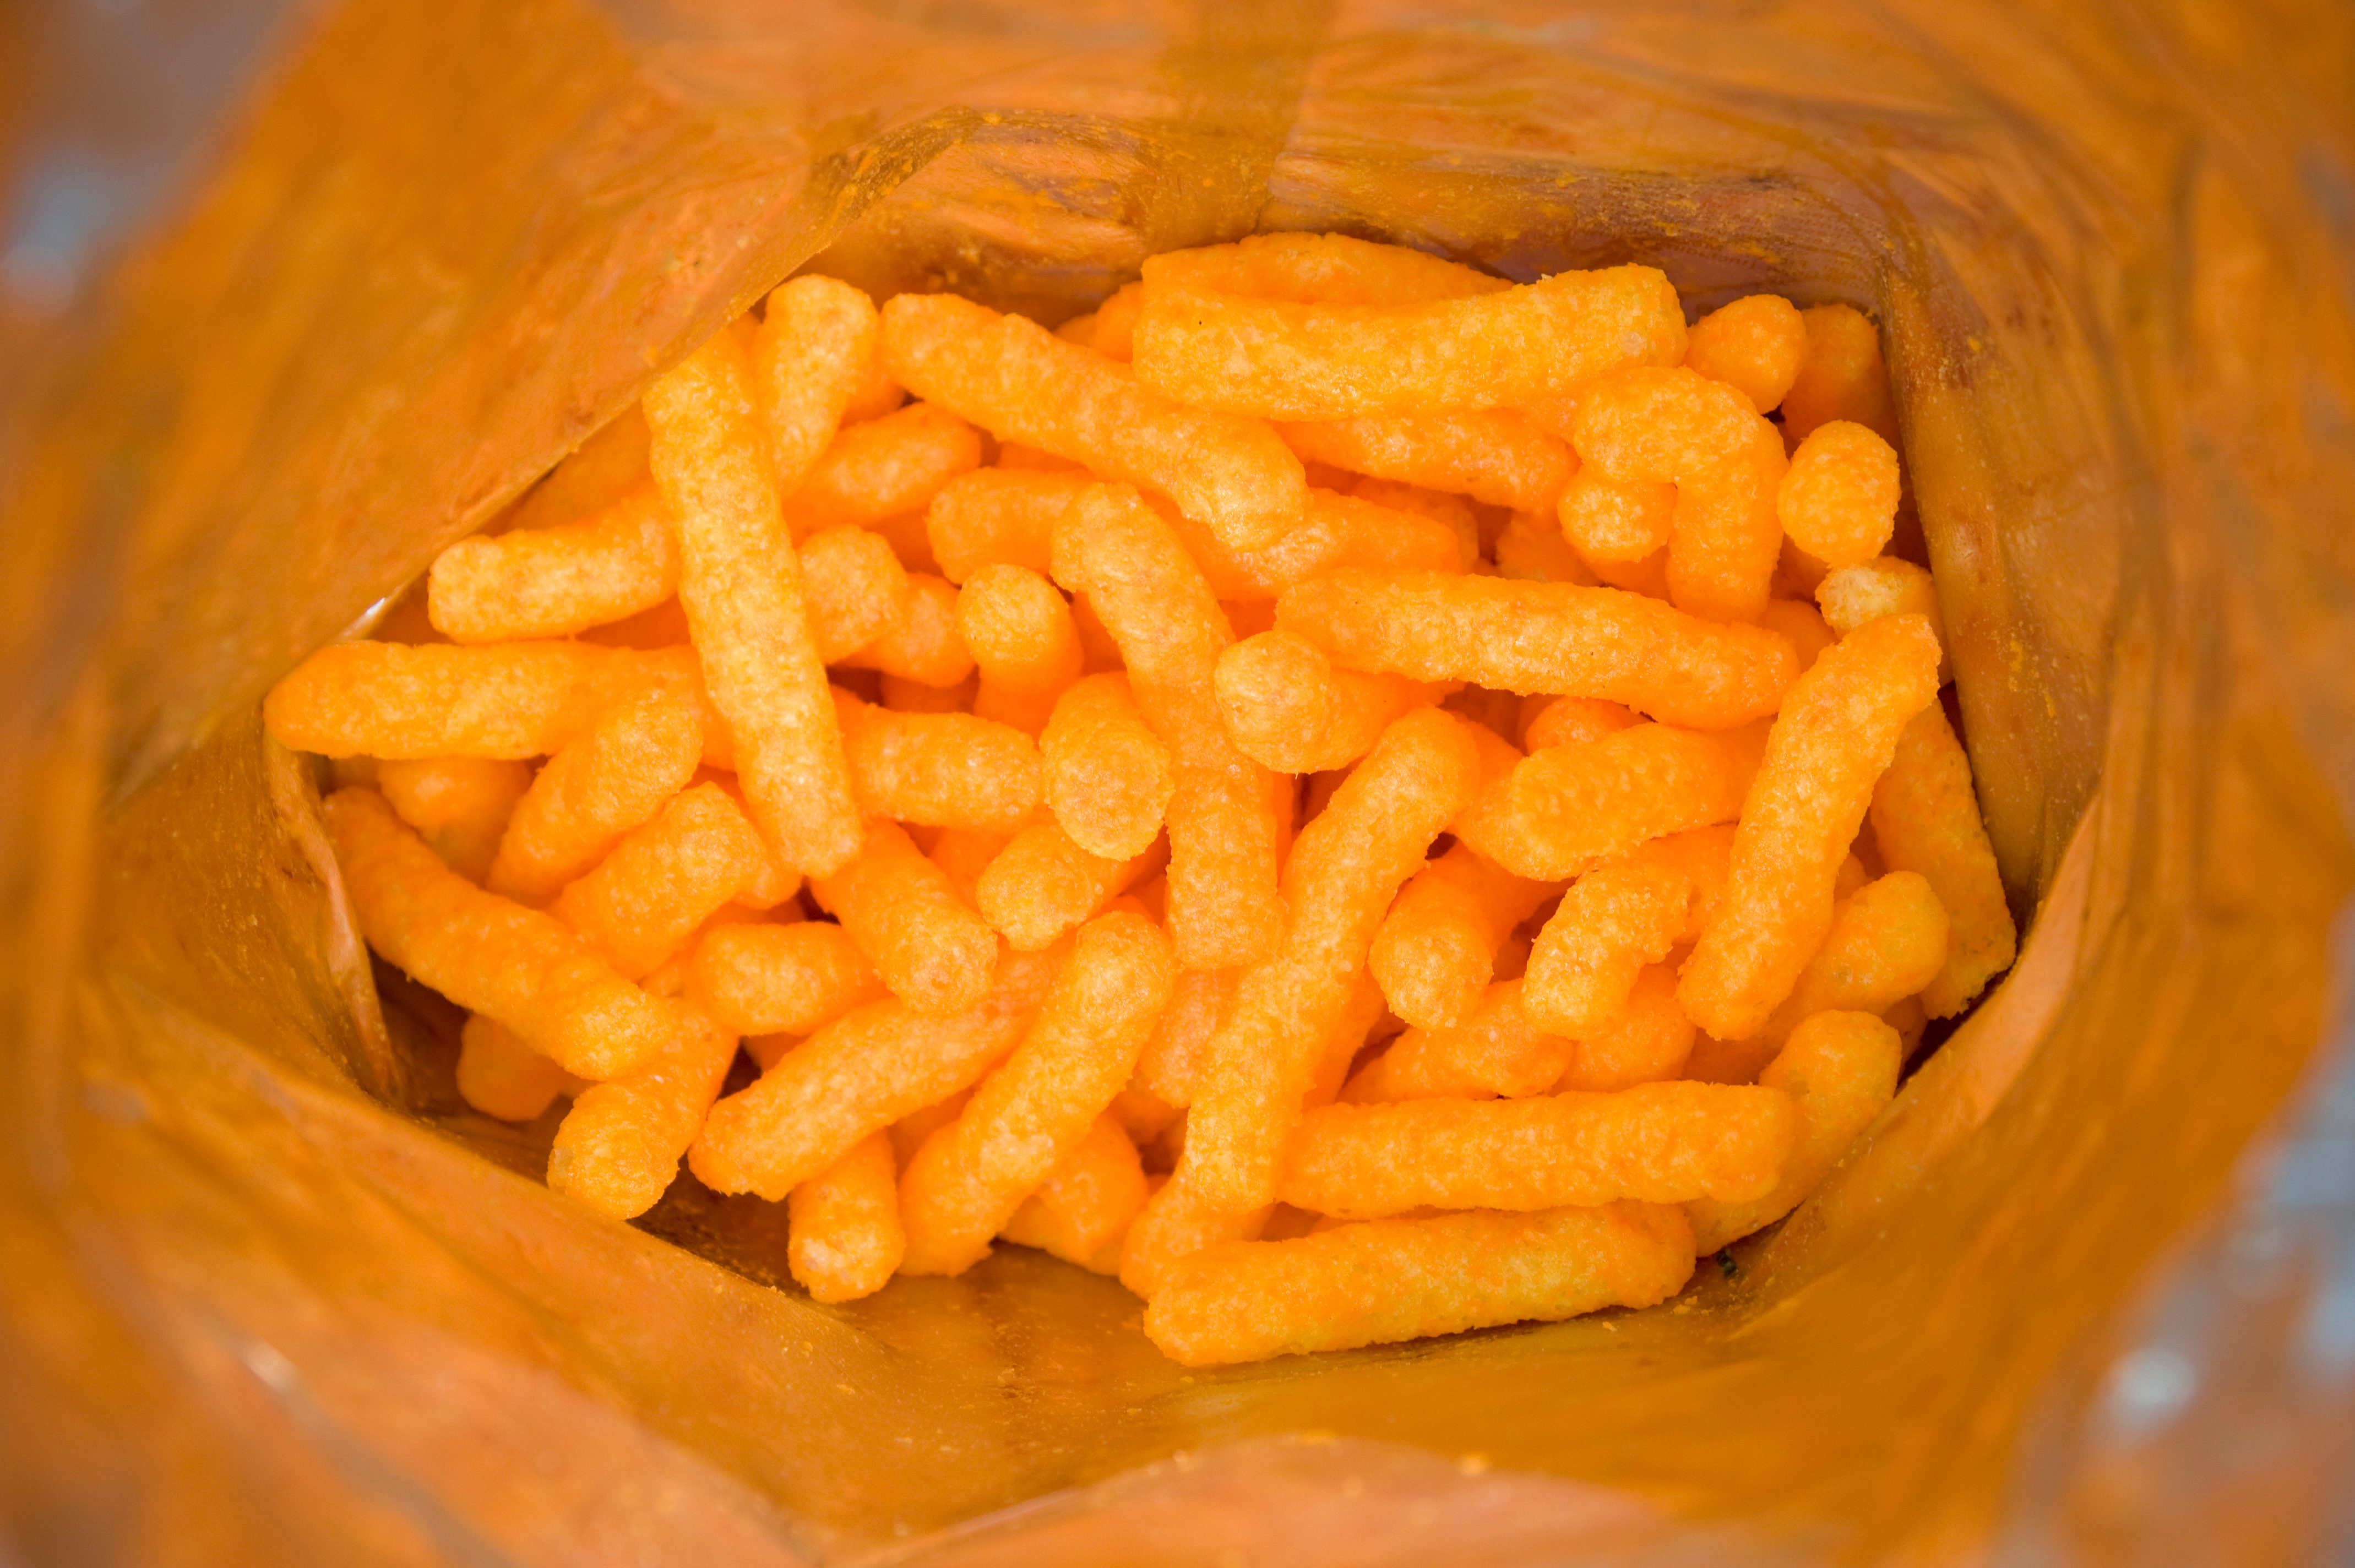 Bag of Cheese Puffs